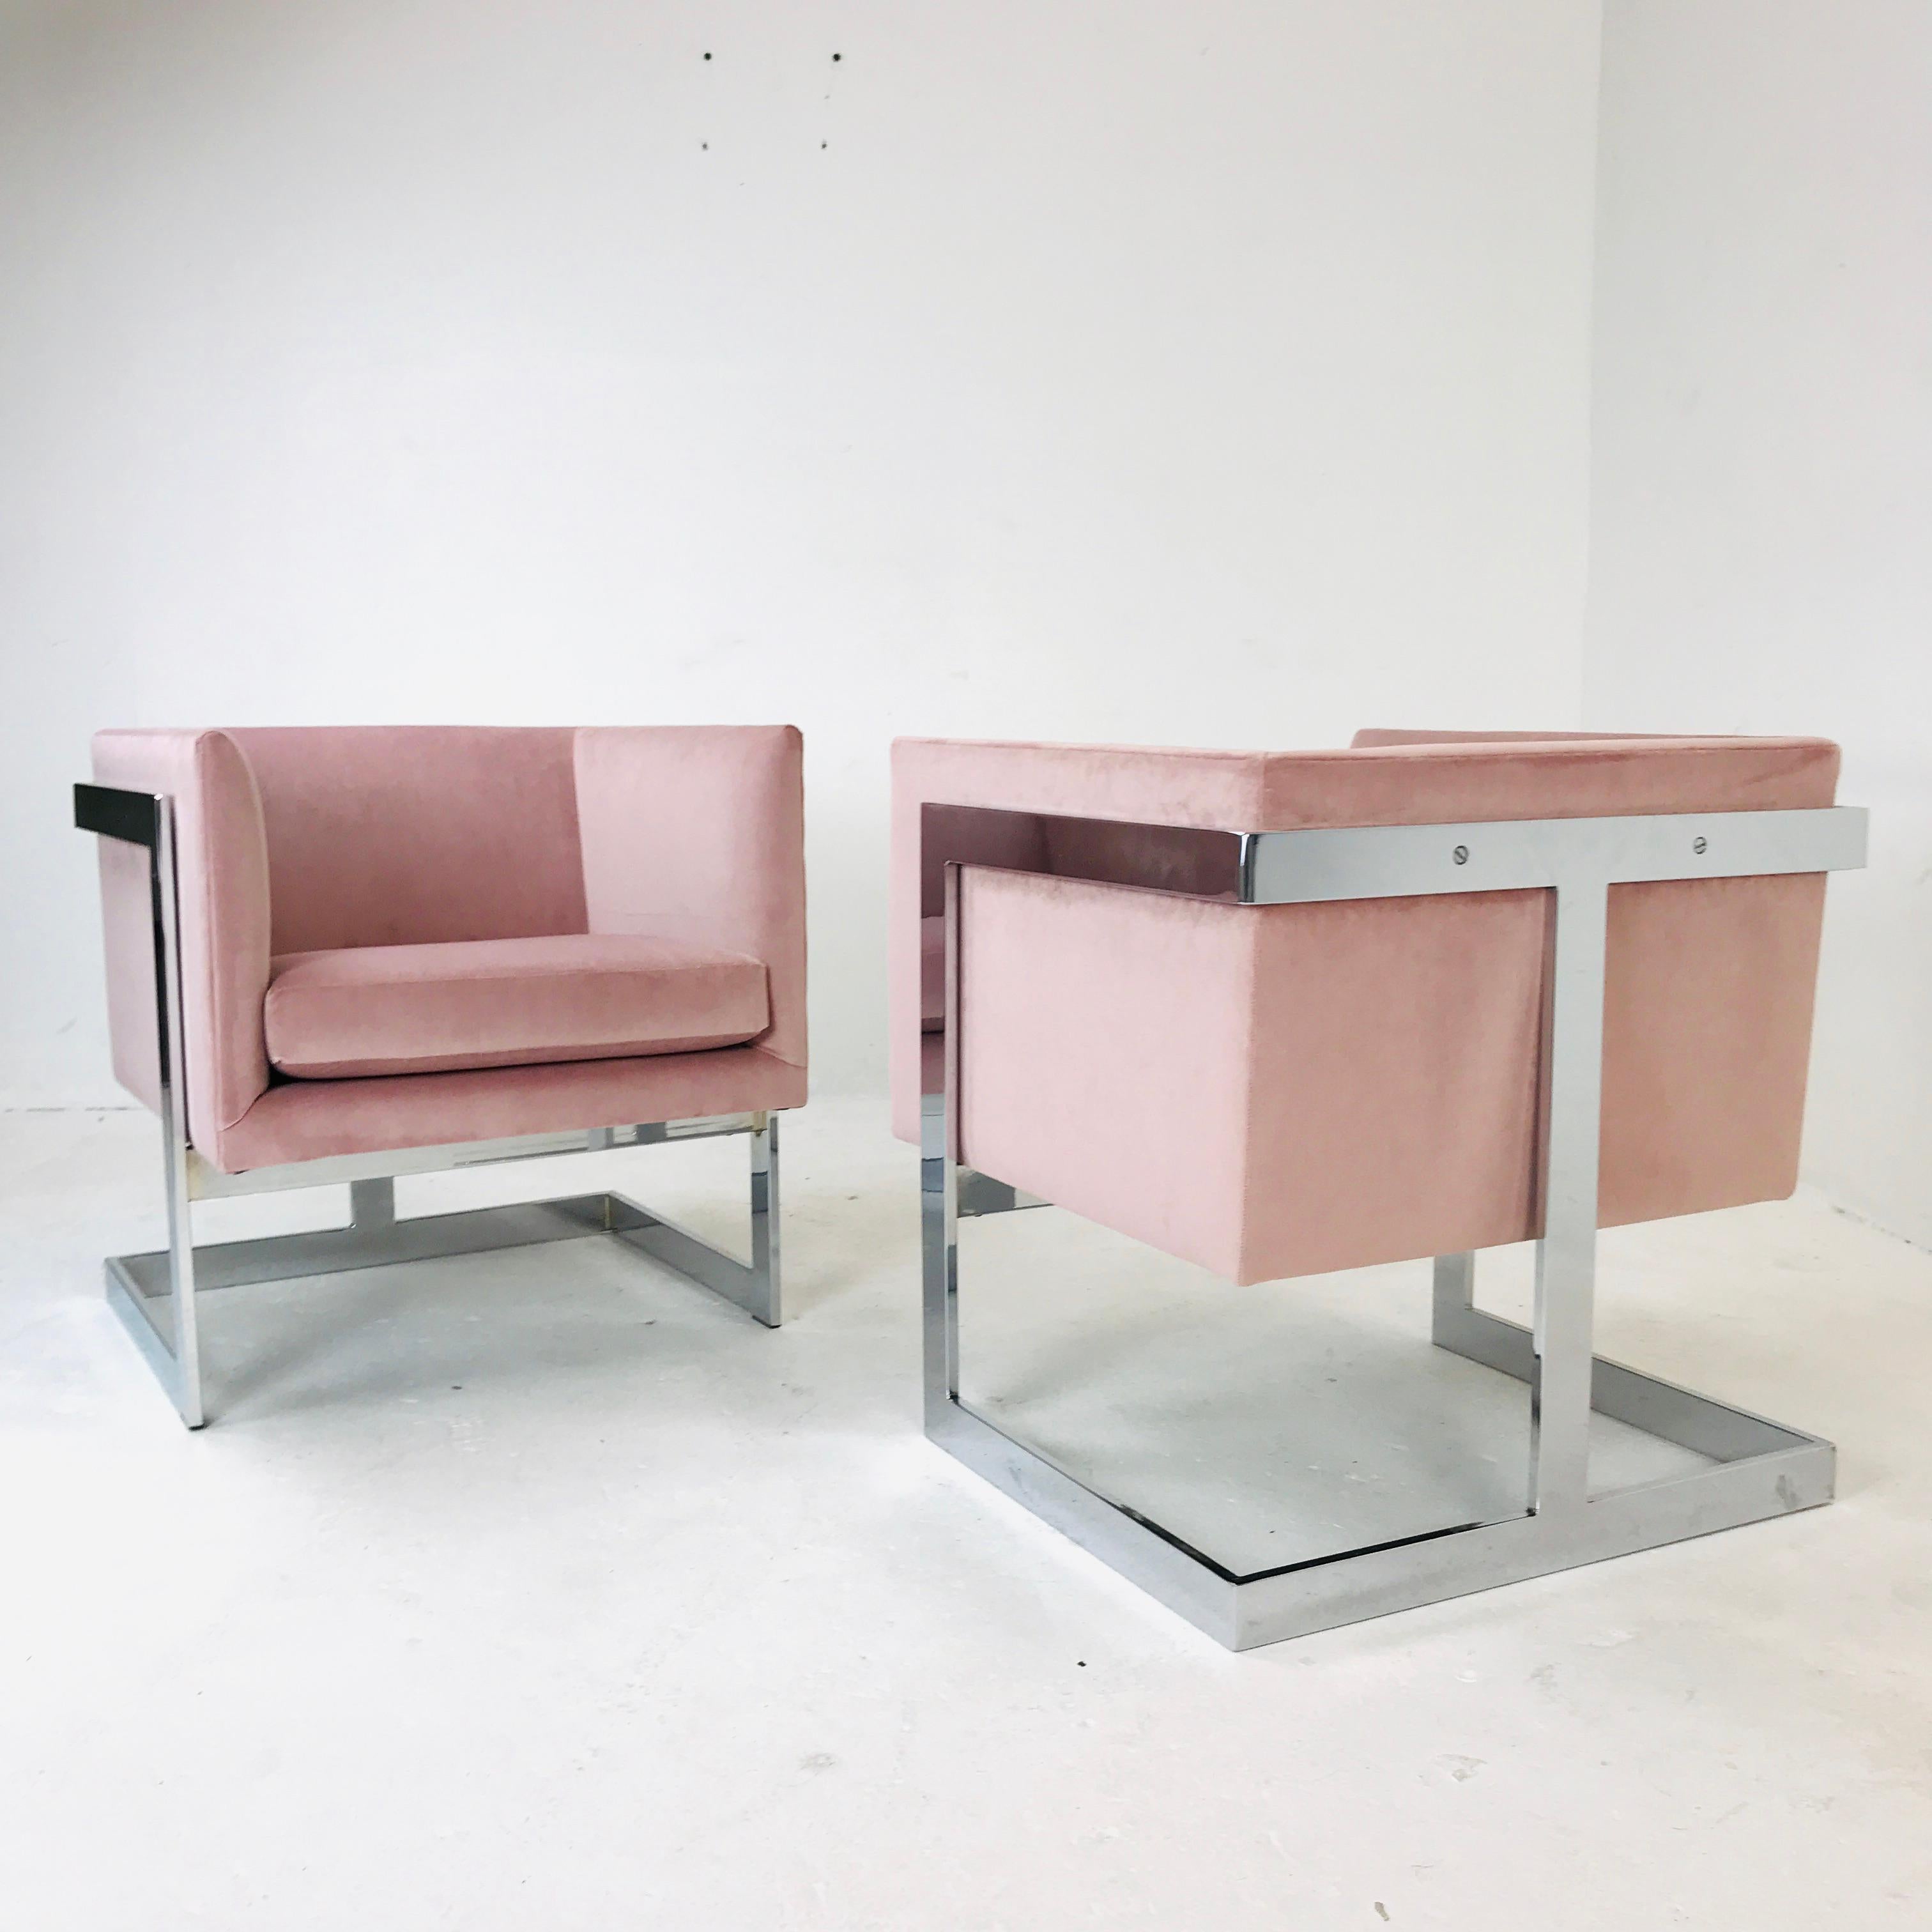 Pair of Milo Baughman T-Back lounge chairs. Chairs are in great vintage condition and have been newly upholstered in rosewater velvet. The chrome is in good condition with some mild wear from use and age.

Dimensions:
24.25 W x 24.25 D x 25